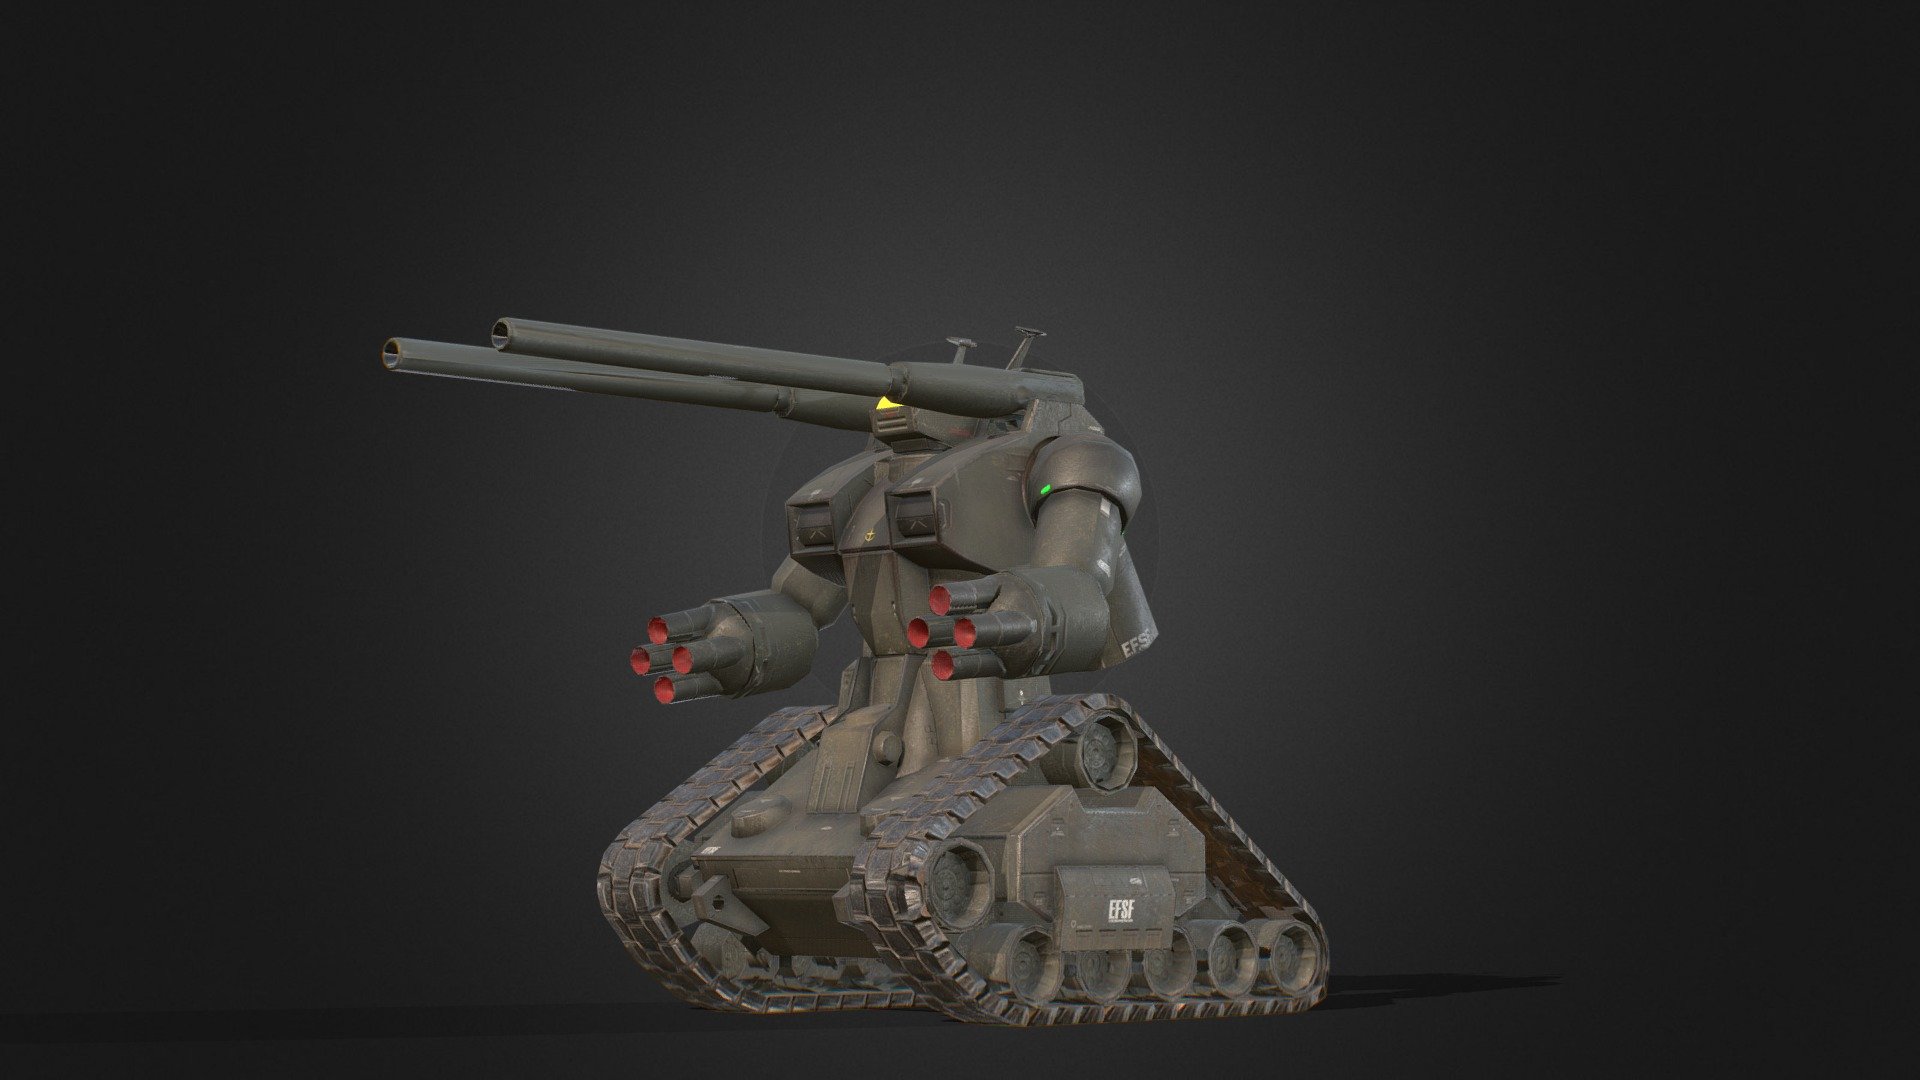 This model was made for One Year War mod of Hearts of Iron IV.

Our Mod Steam Home Page

https://steamcommunity.com/sharedfiles/filedetails/?id=2064985570 - RX-75 Guntank - Real Type Colour - 3D model by One Year War Mod (@hoi4oneyearwar) 3d model